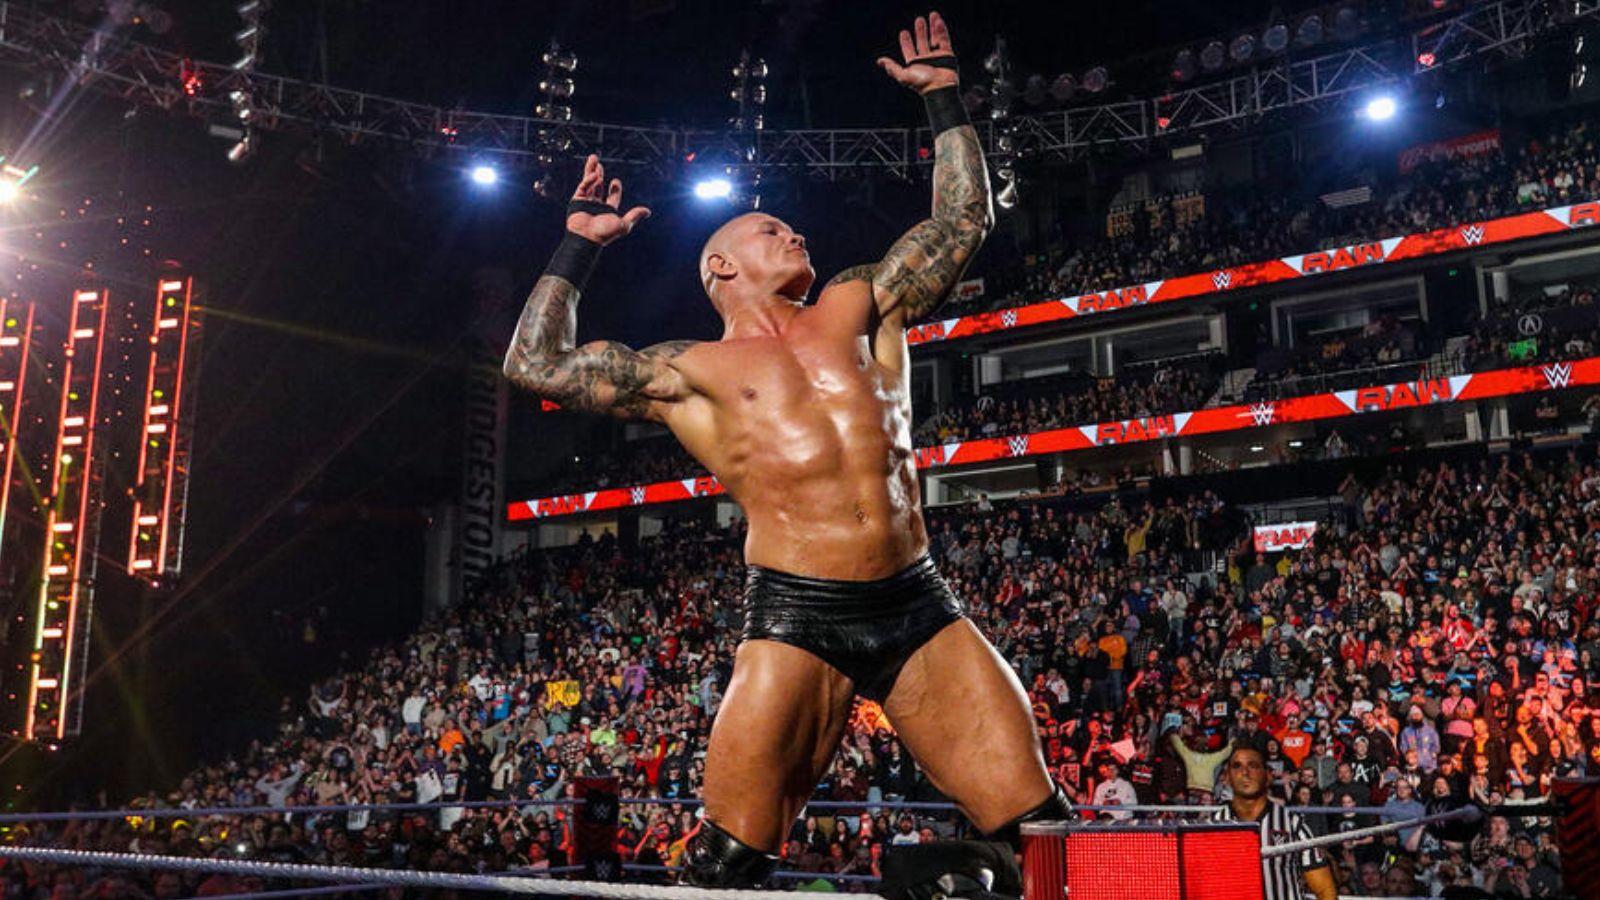 Randy Orton doing his signature pose as a member of the WWE.